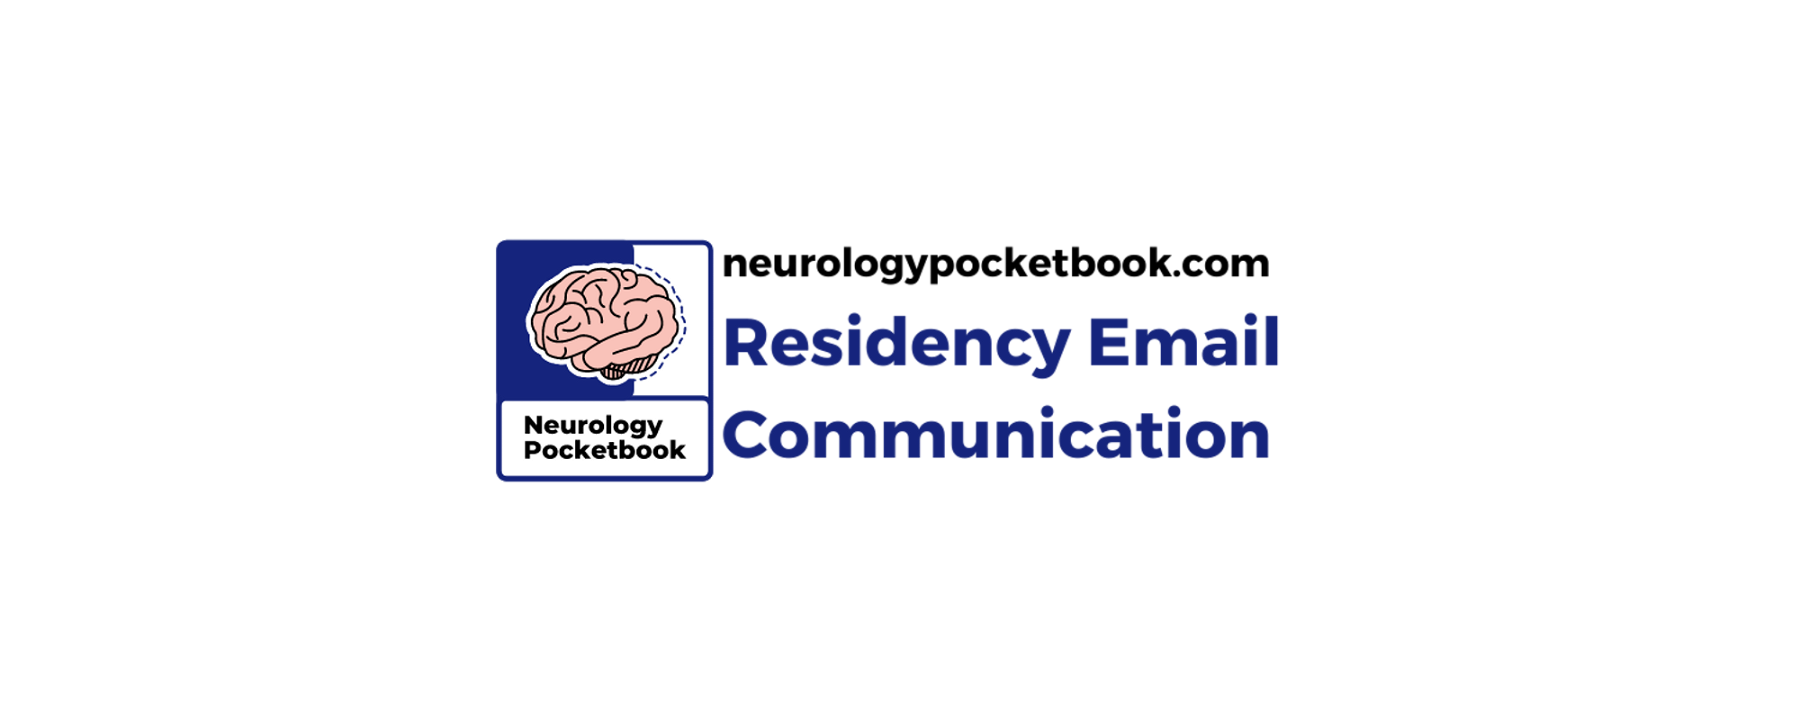 Residency Email Communication